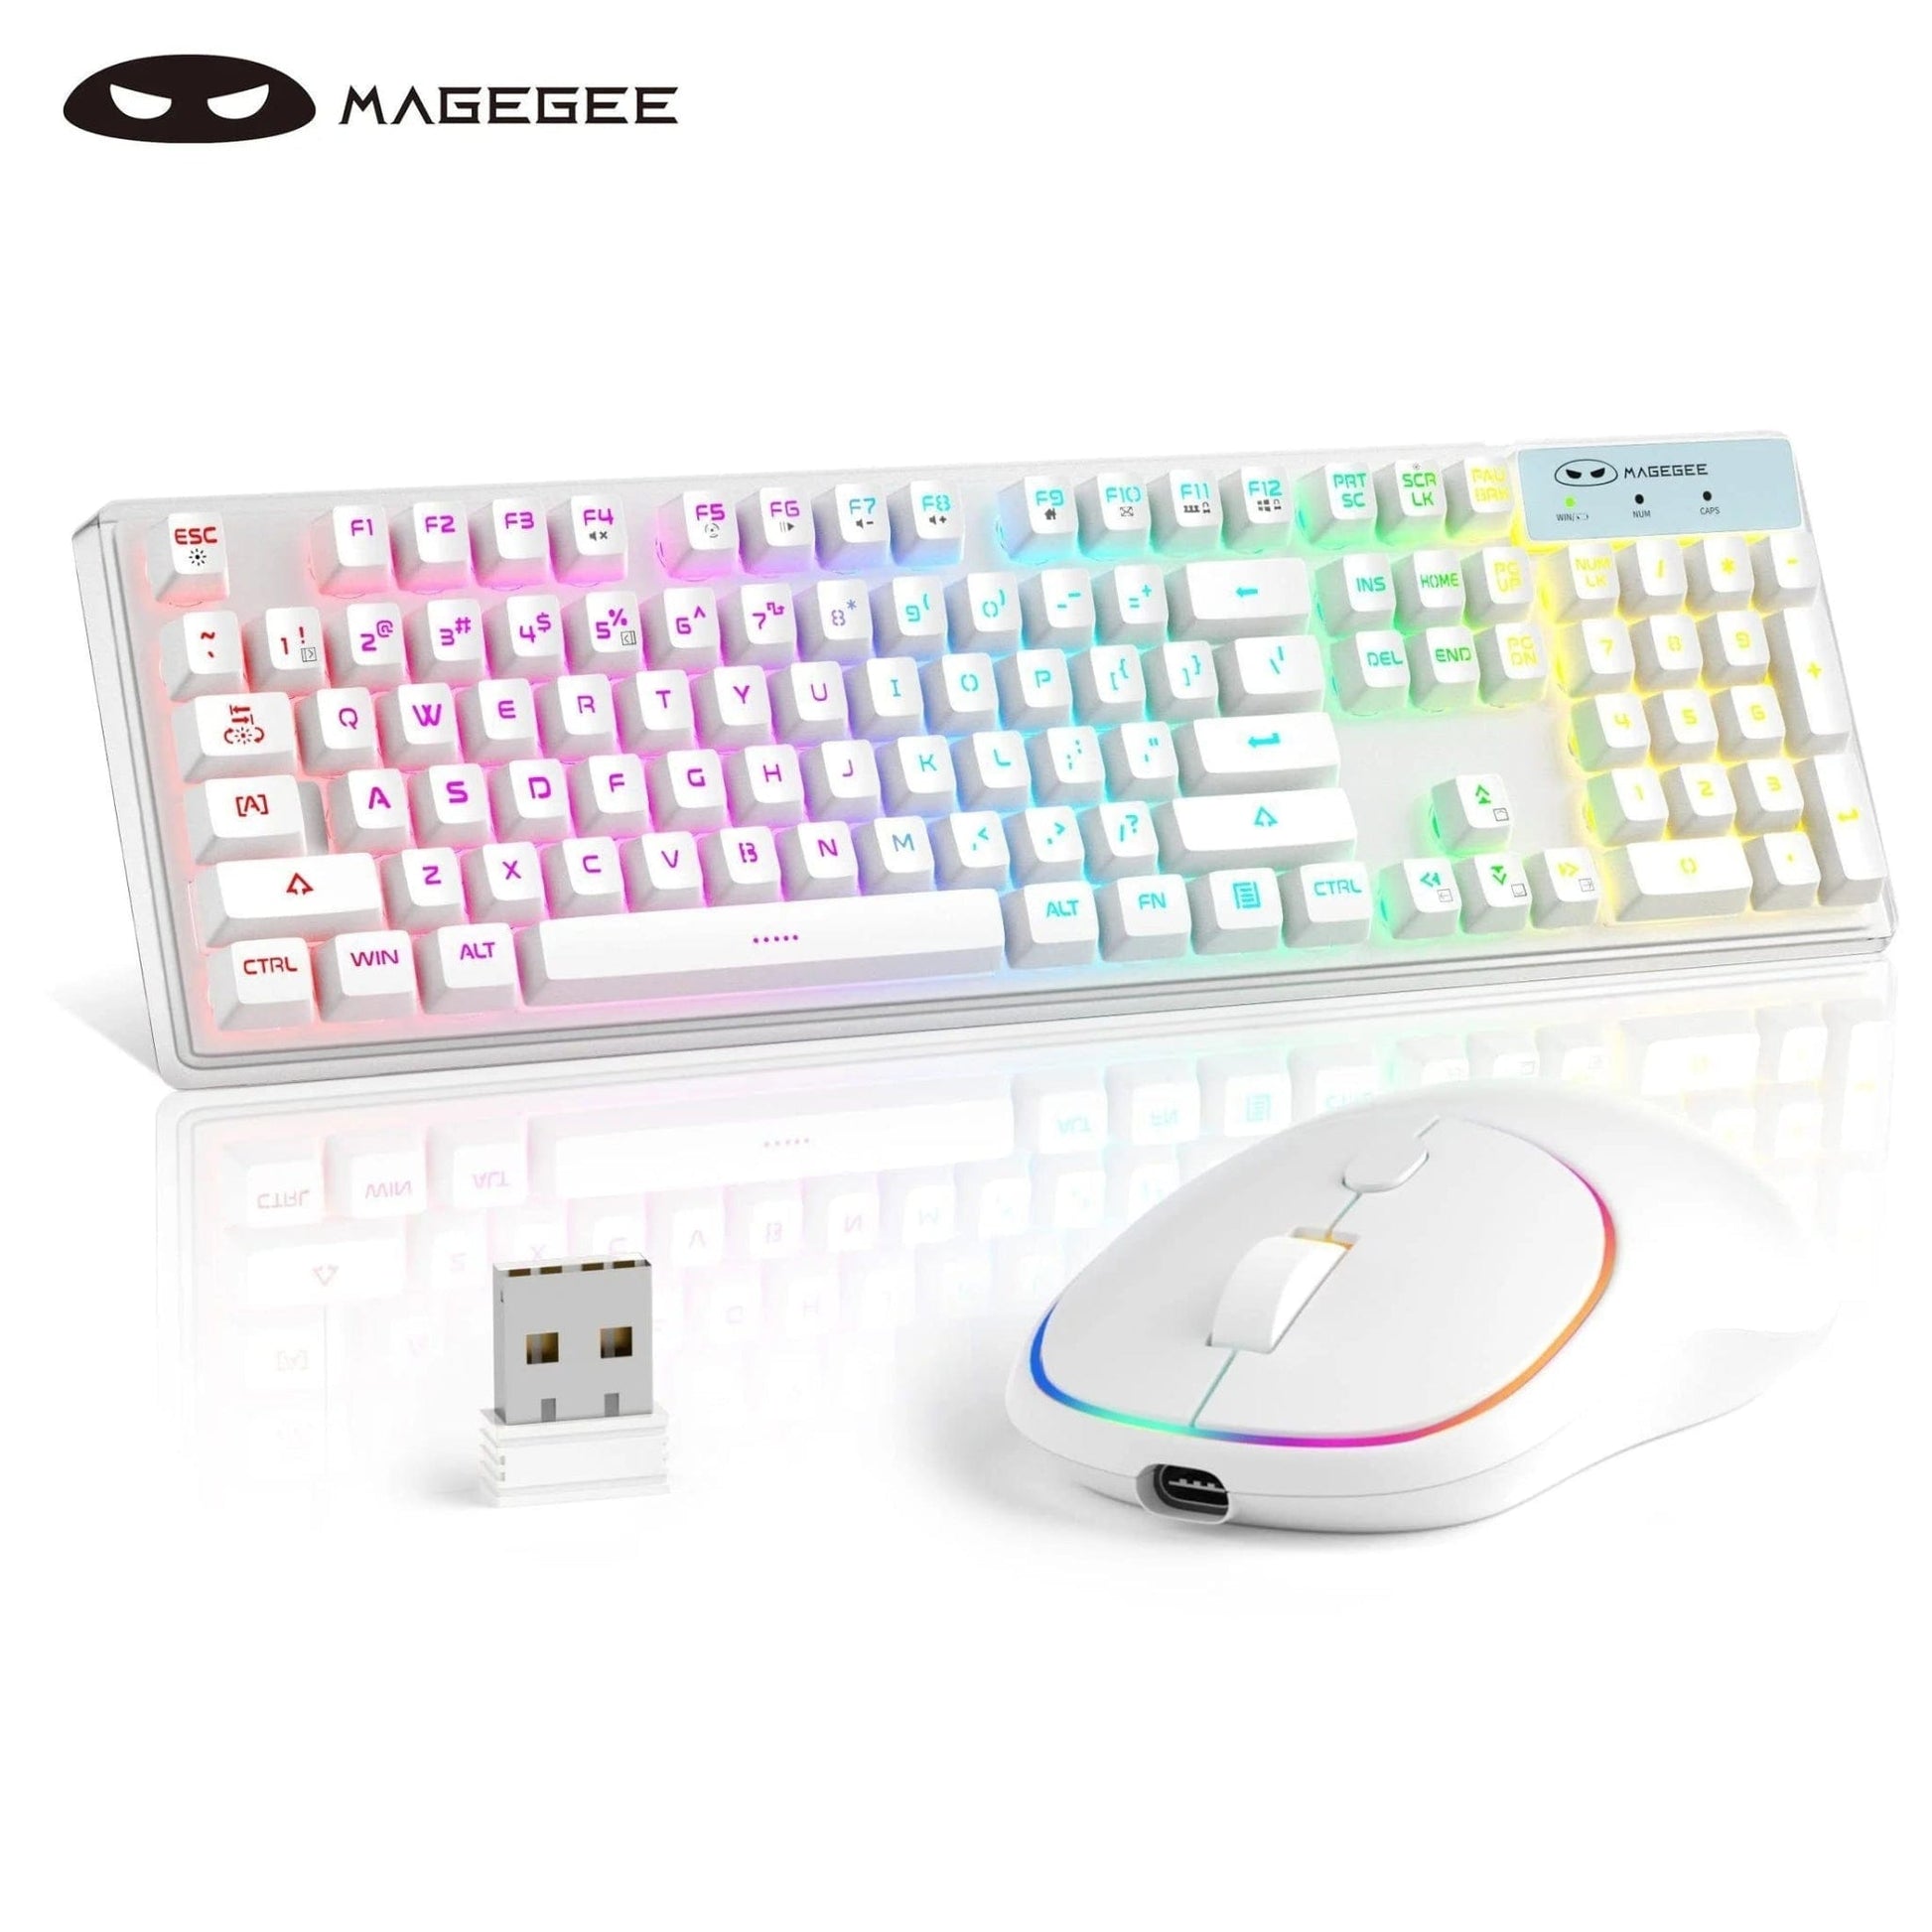 ÆLECTRONIX White MageGee Wireless Gaming Keyboard and Mouse Combo